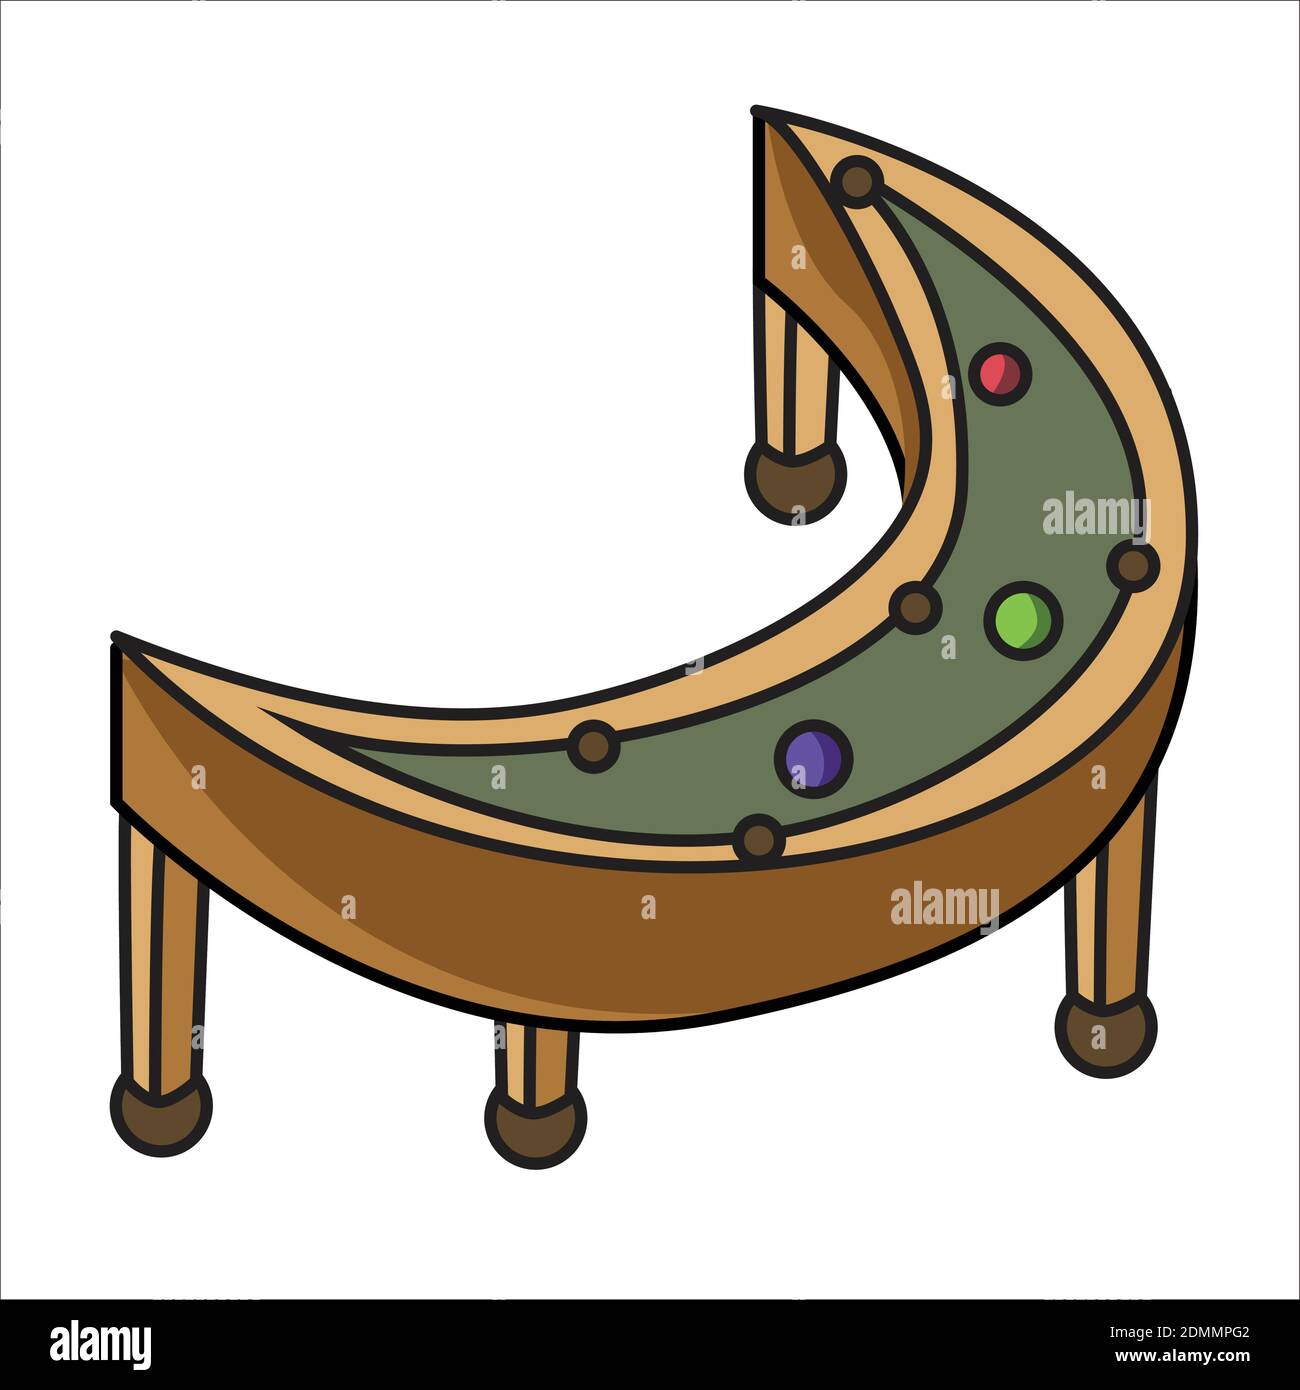 Crescent pool table. Illustration, Vector Pool Table variation. Stock Vector